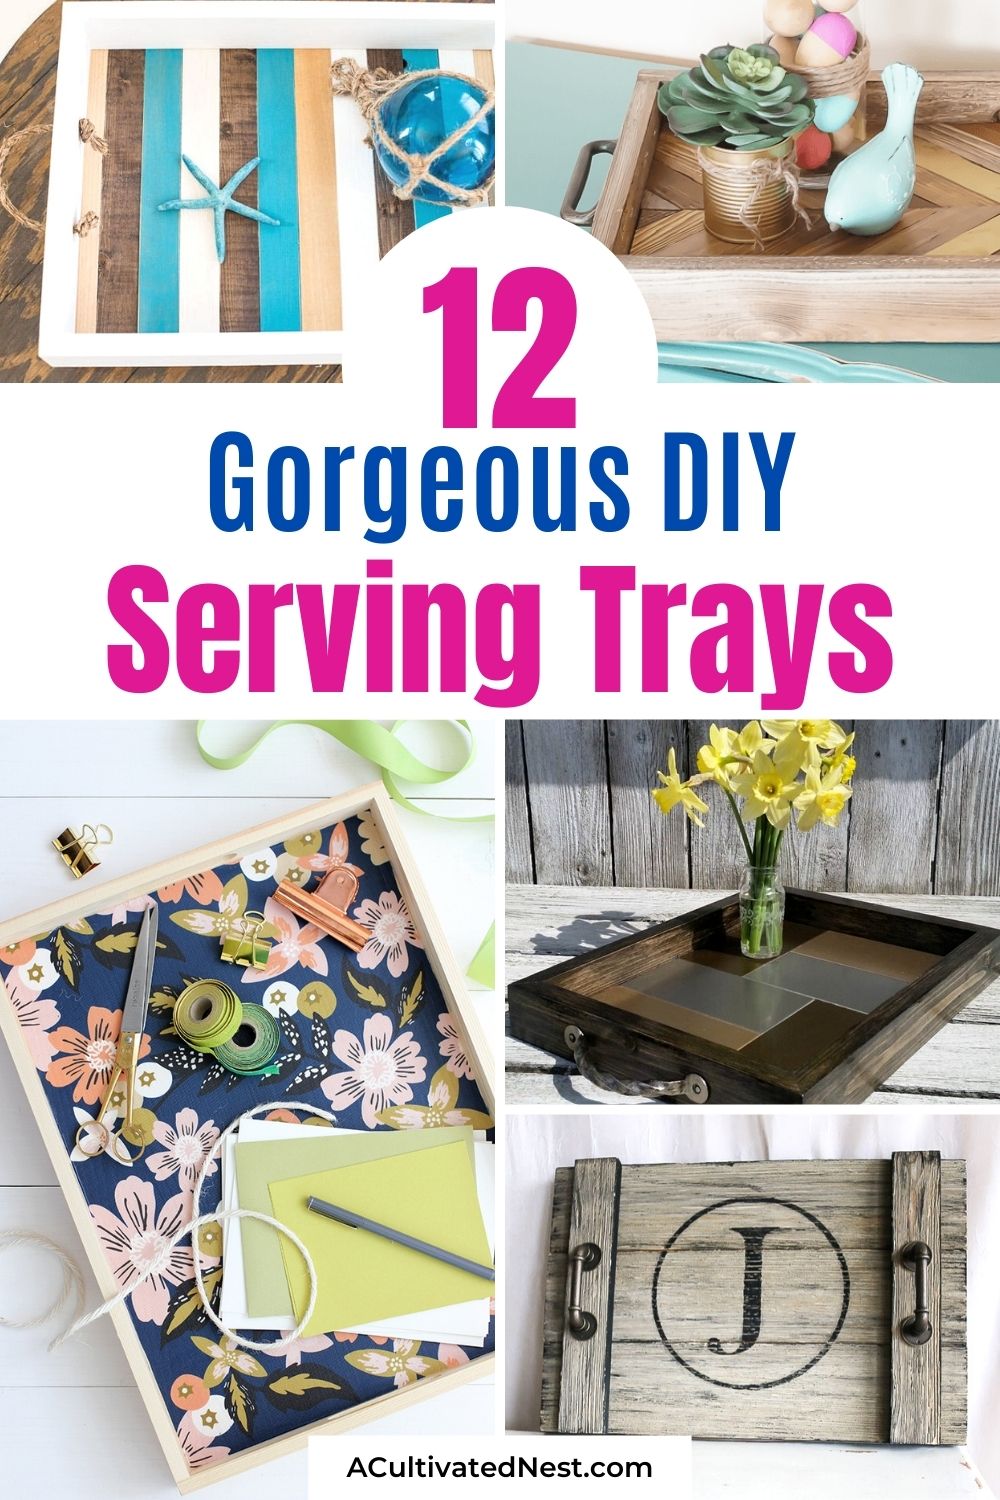 12 Charming DIY Serving Trays- If you want to add style to your space on a budget, then grab the craft supplies and get busy making these 12 charming DIY serving trays. | #diyDecor #craft #DIYs #diyProject #ACultivatedNest